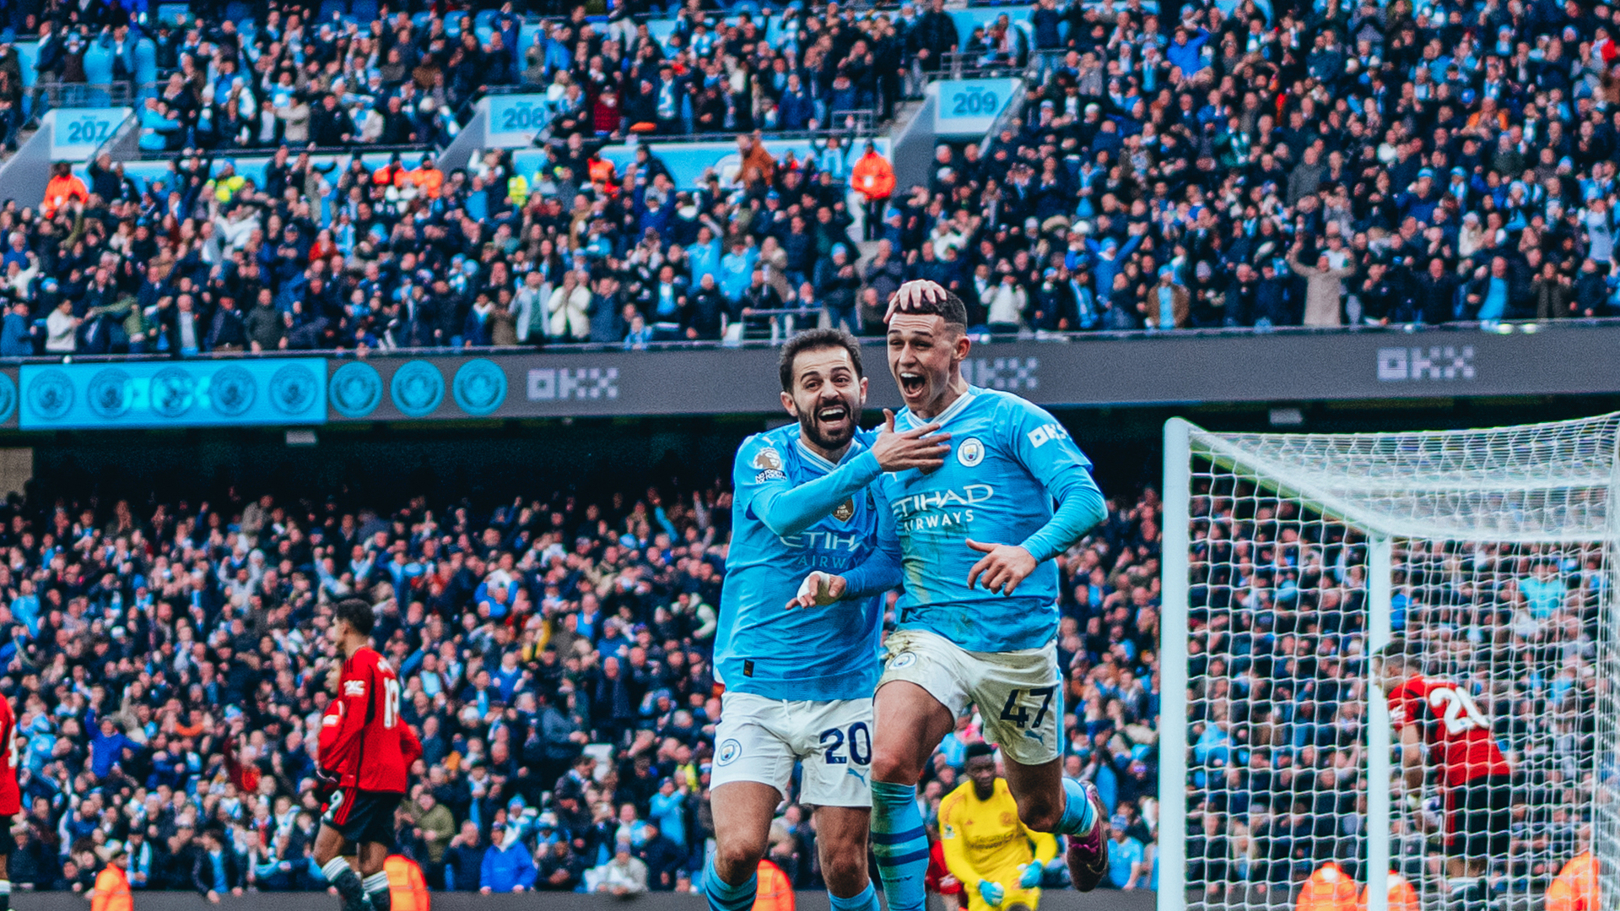 Manchester derby win 'means everything', says Foden